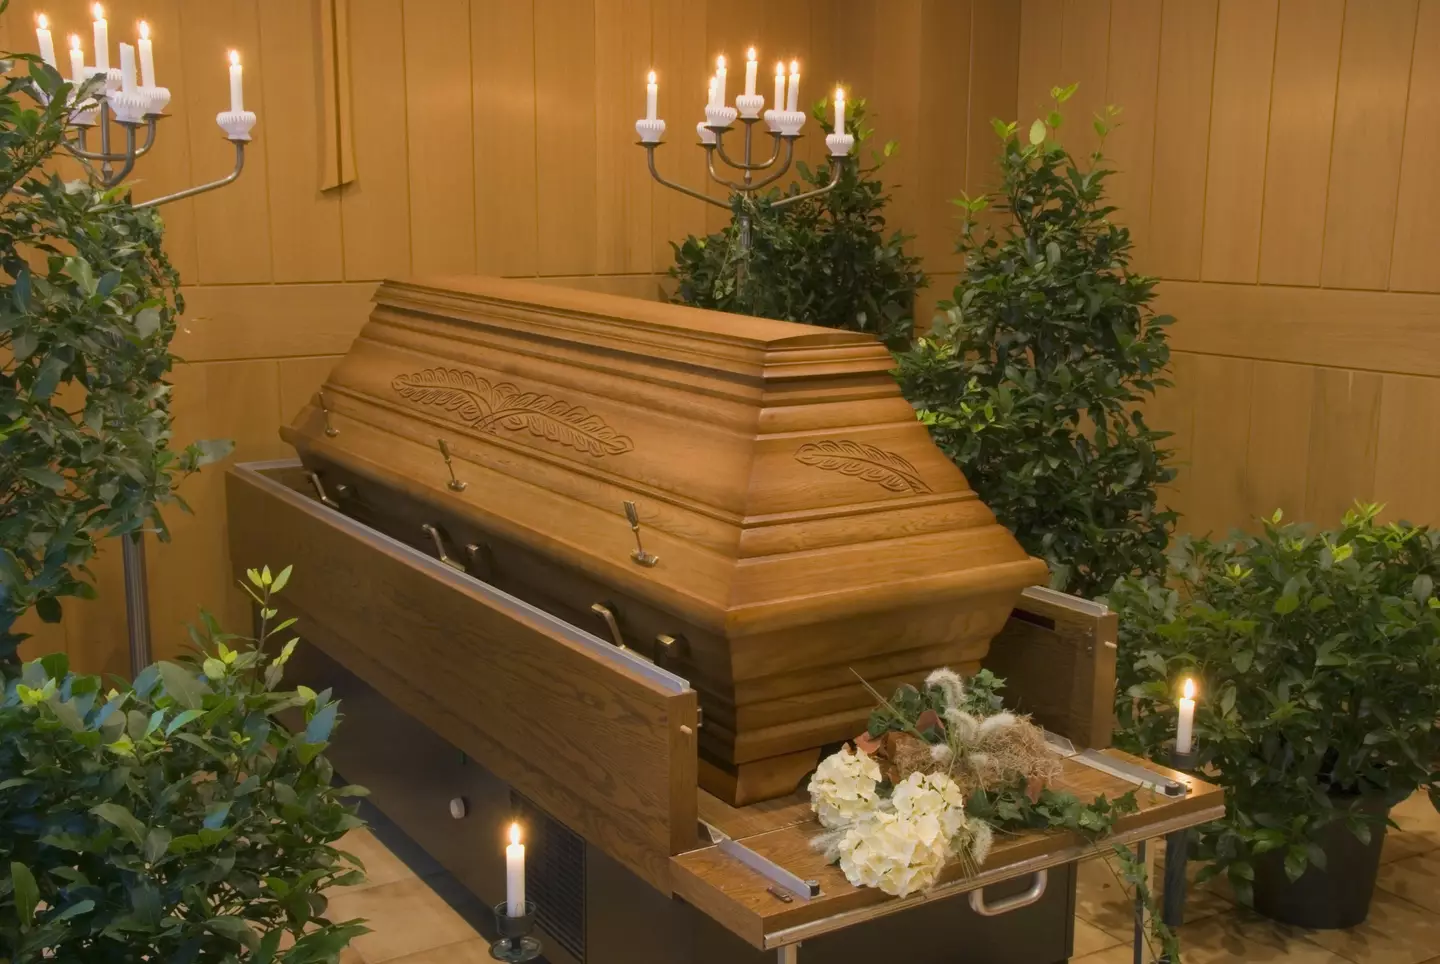 Bella had been in her coffin at her wake when she woke up.